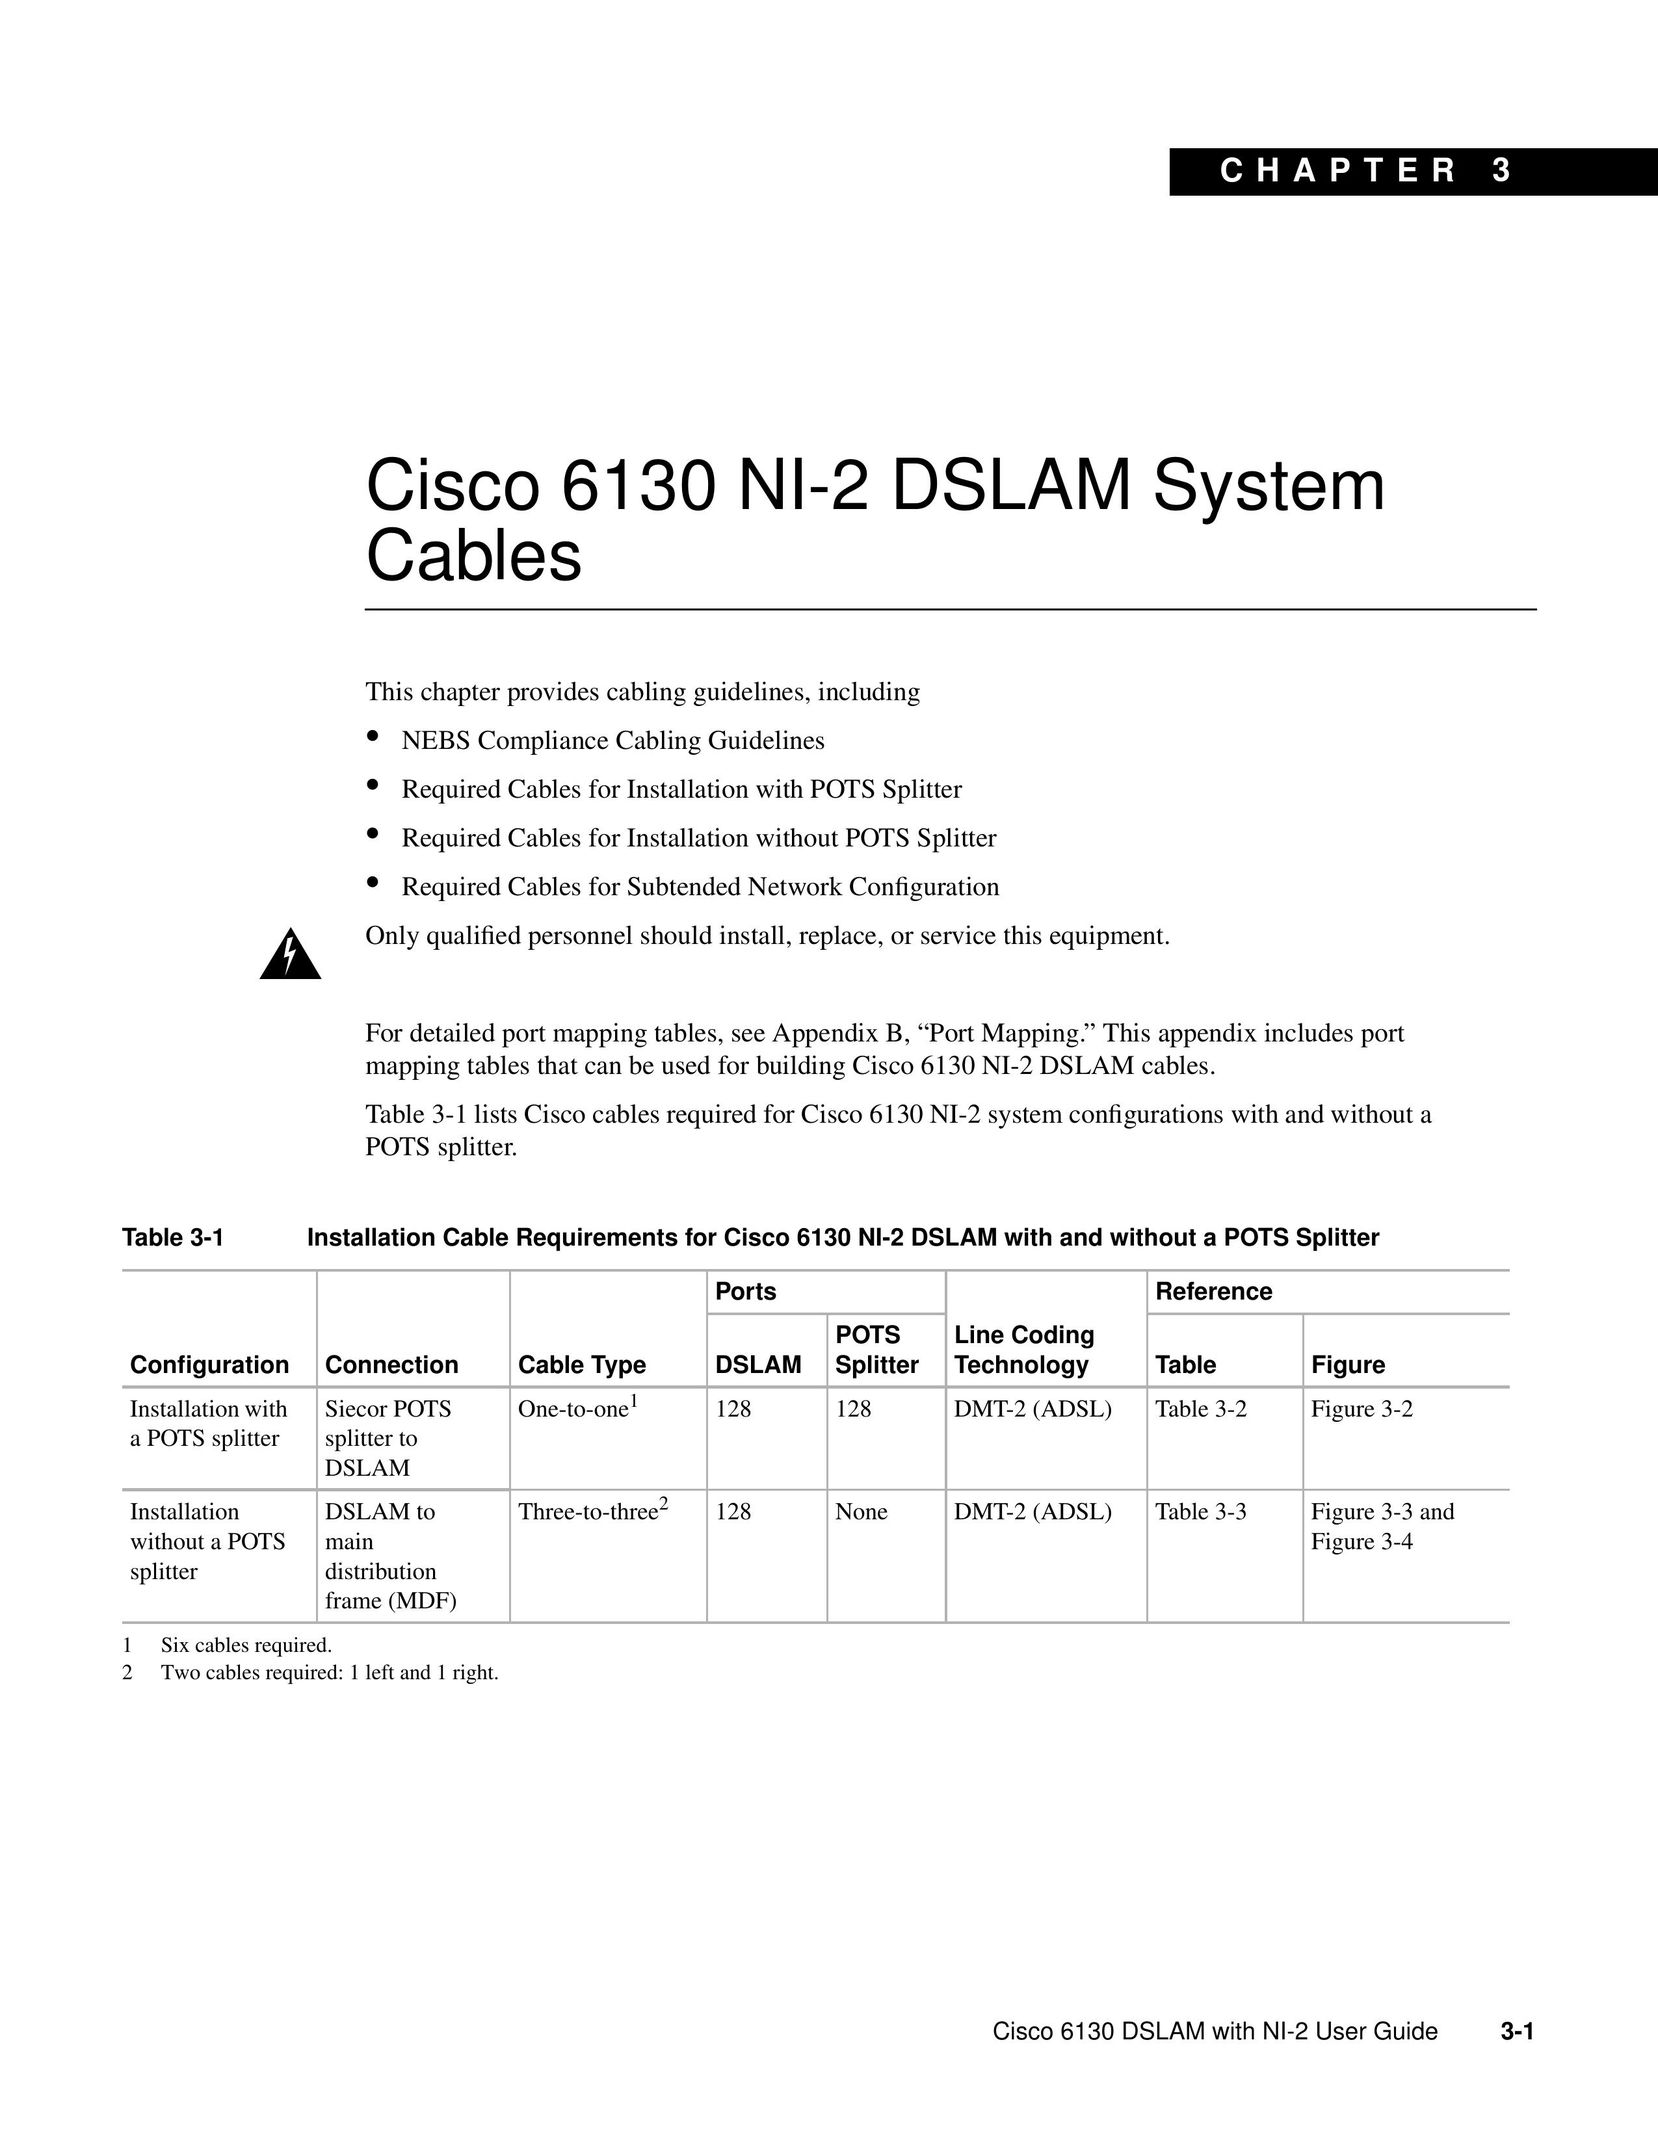 Cisco Systems 6130 TV Cables User Manual